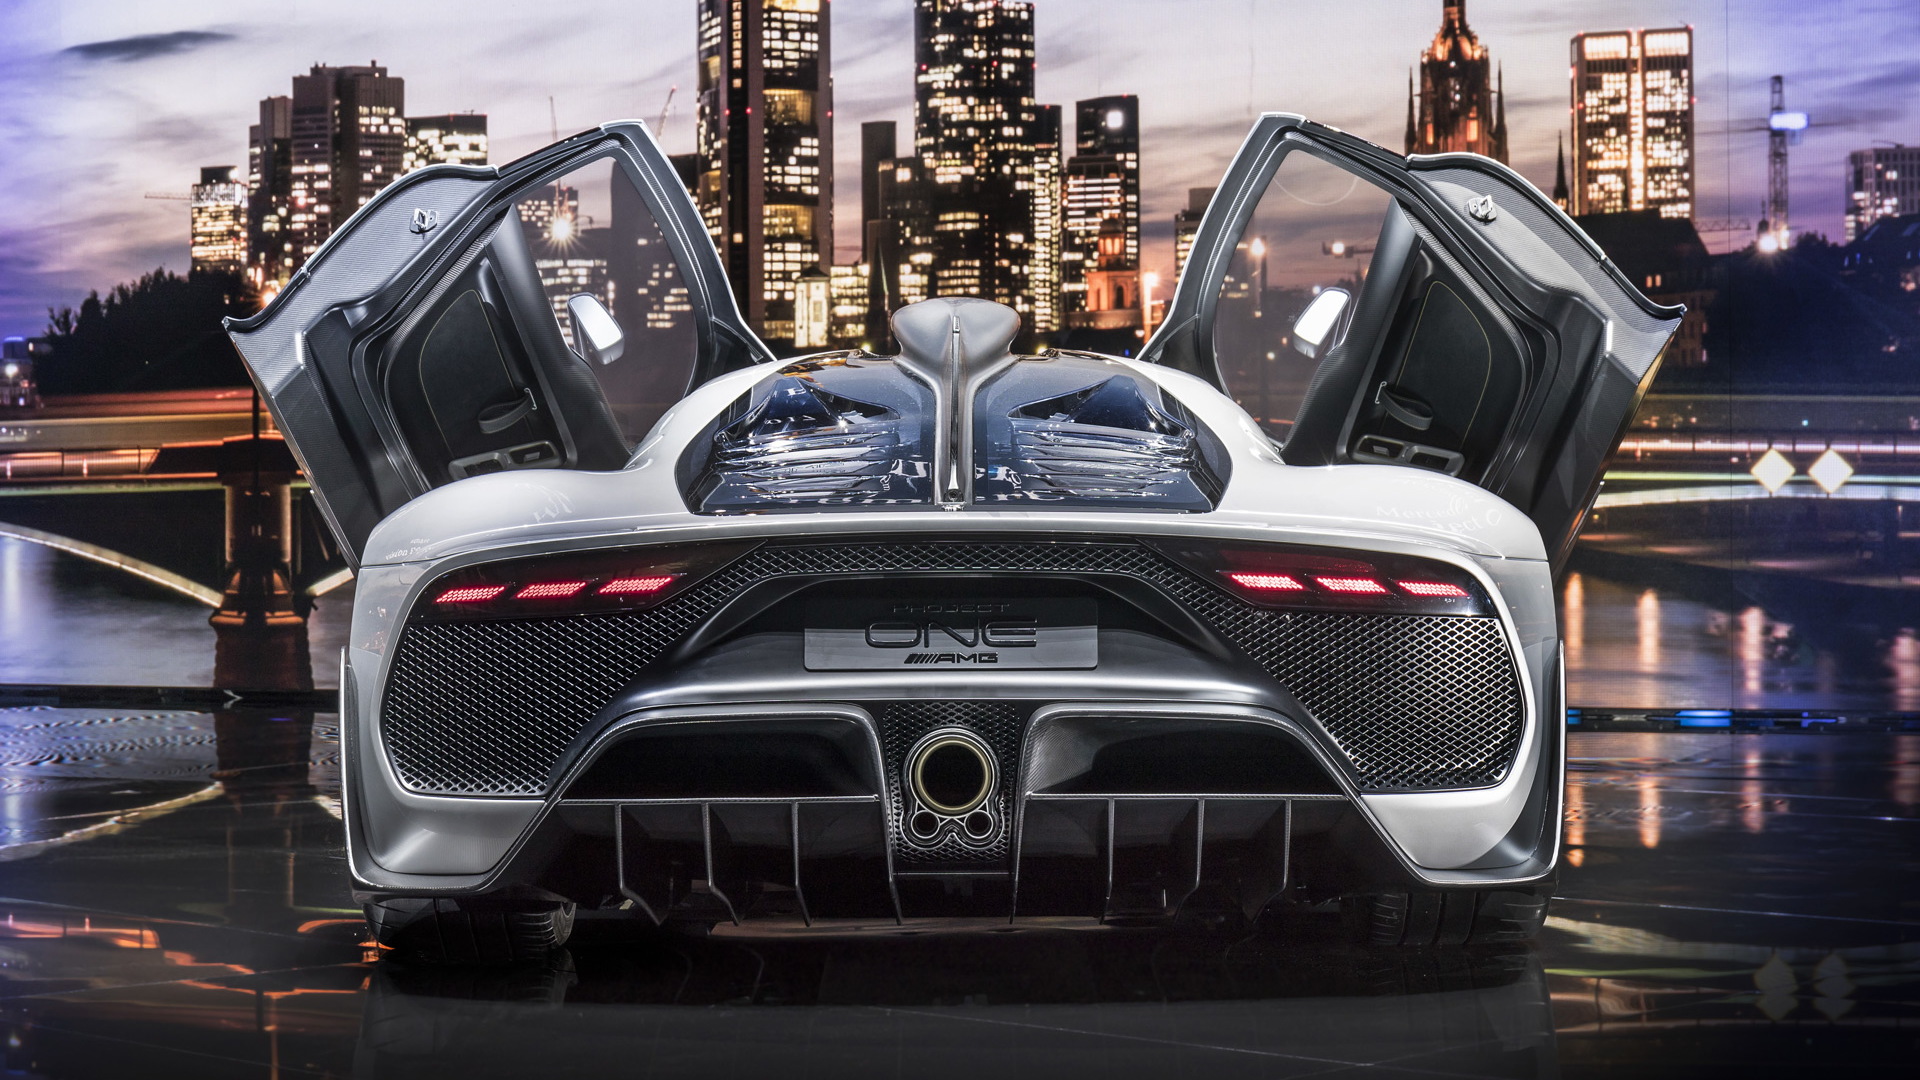 Mercedes Amg Project One Looks Insane On The Road